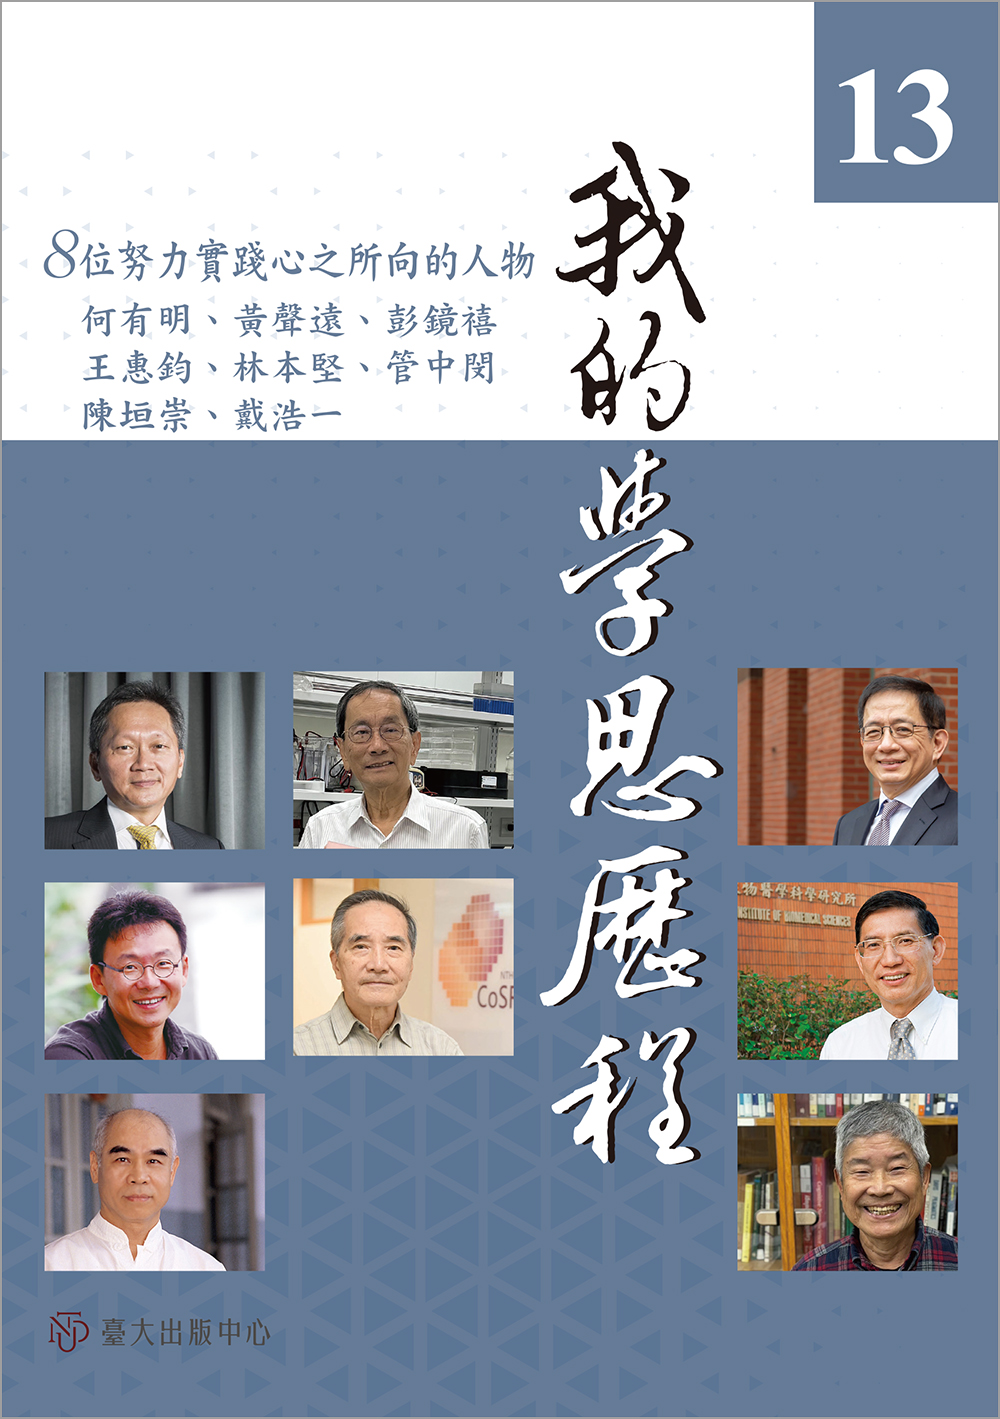 NTU Lectures on the Intellectual and Spiritual Pilgrimage (Vol. 13)